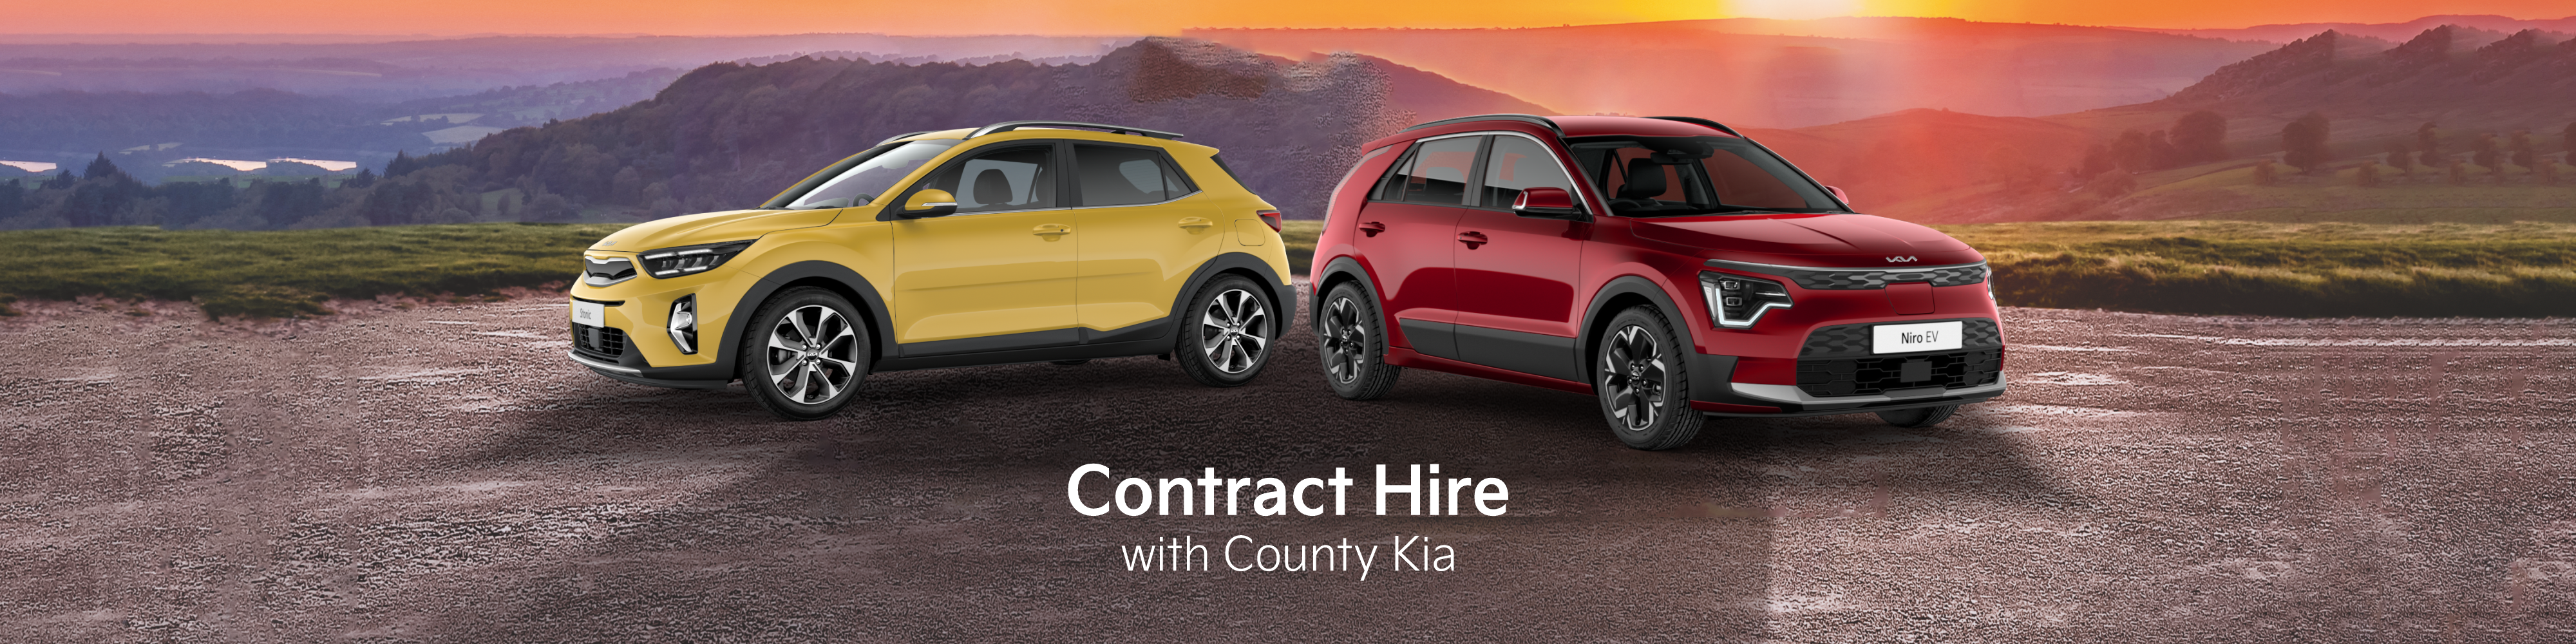 Welcome to the latest Personal Contract Hire (PCH) offers at County Kia